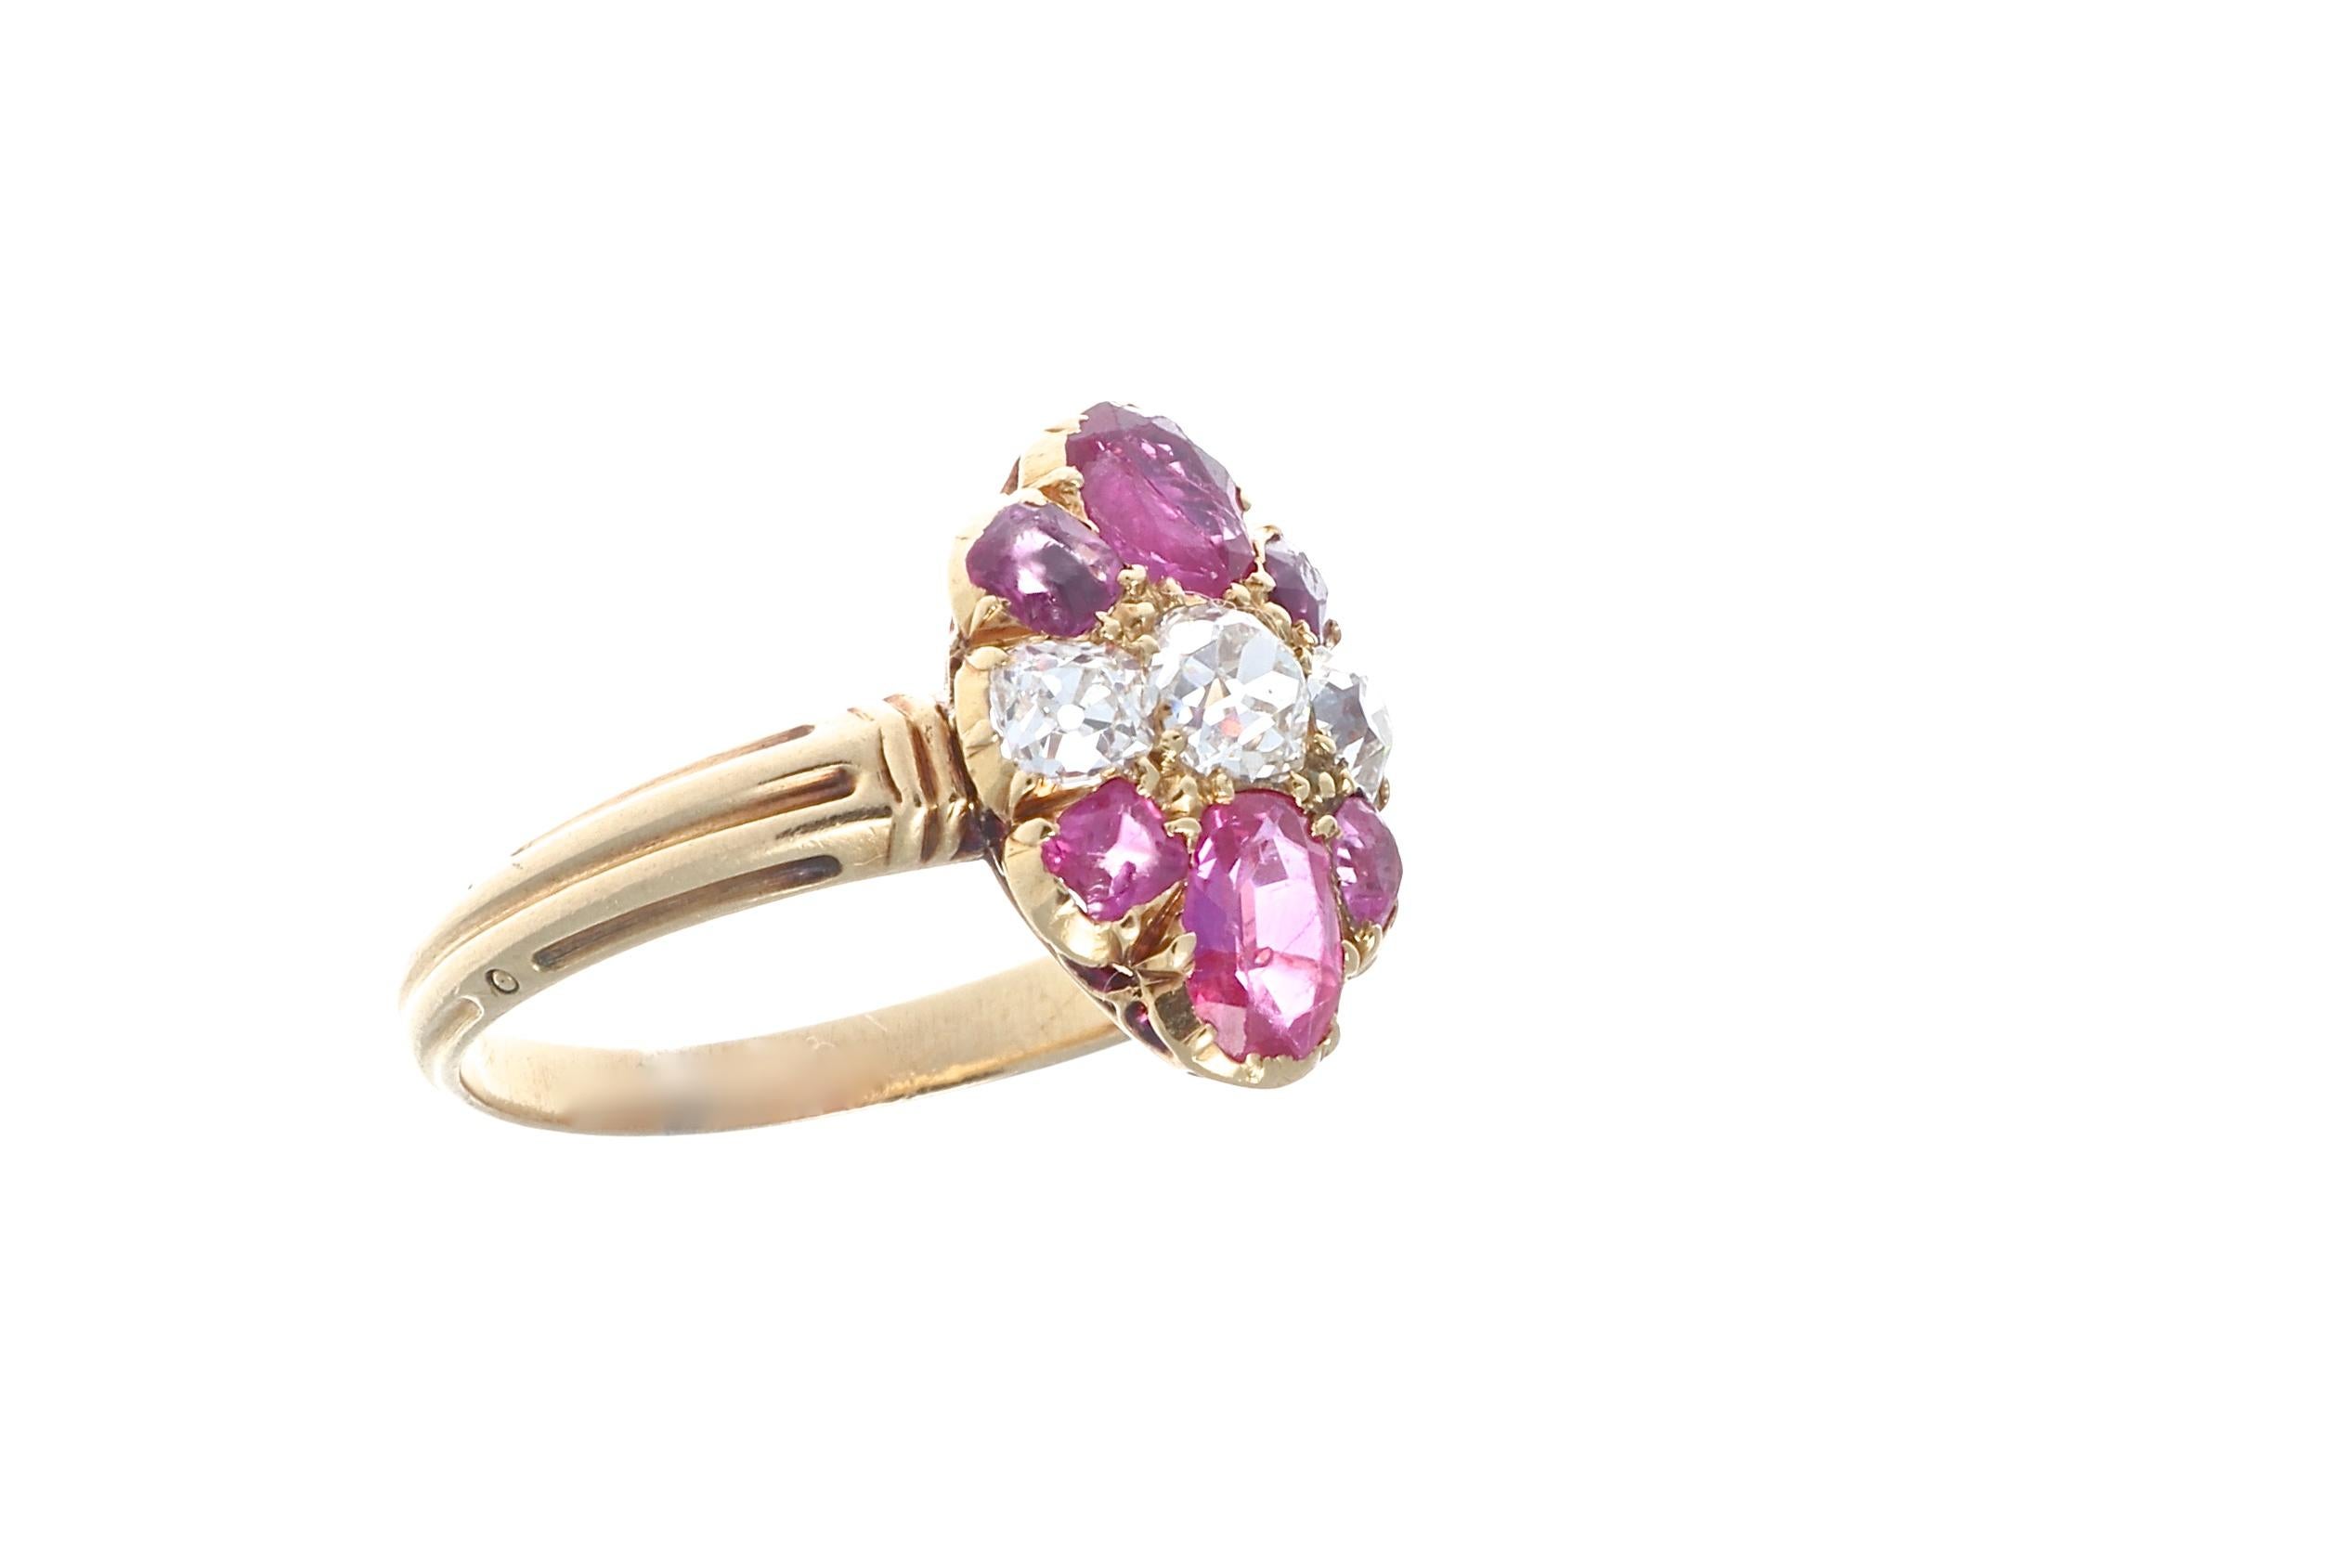 The iconic flower motif, a quintessential jewelry design capturing everything that’s beautiful about the natural world. Used for centuries in jewelry the flower motif has taken on many forms and colors. In full bloom the motif features vibrant pink